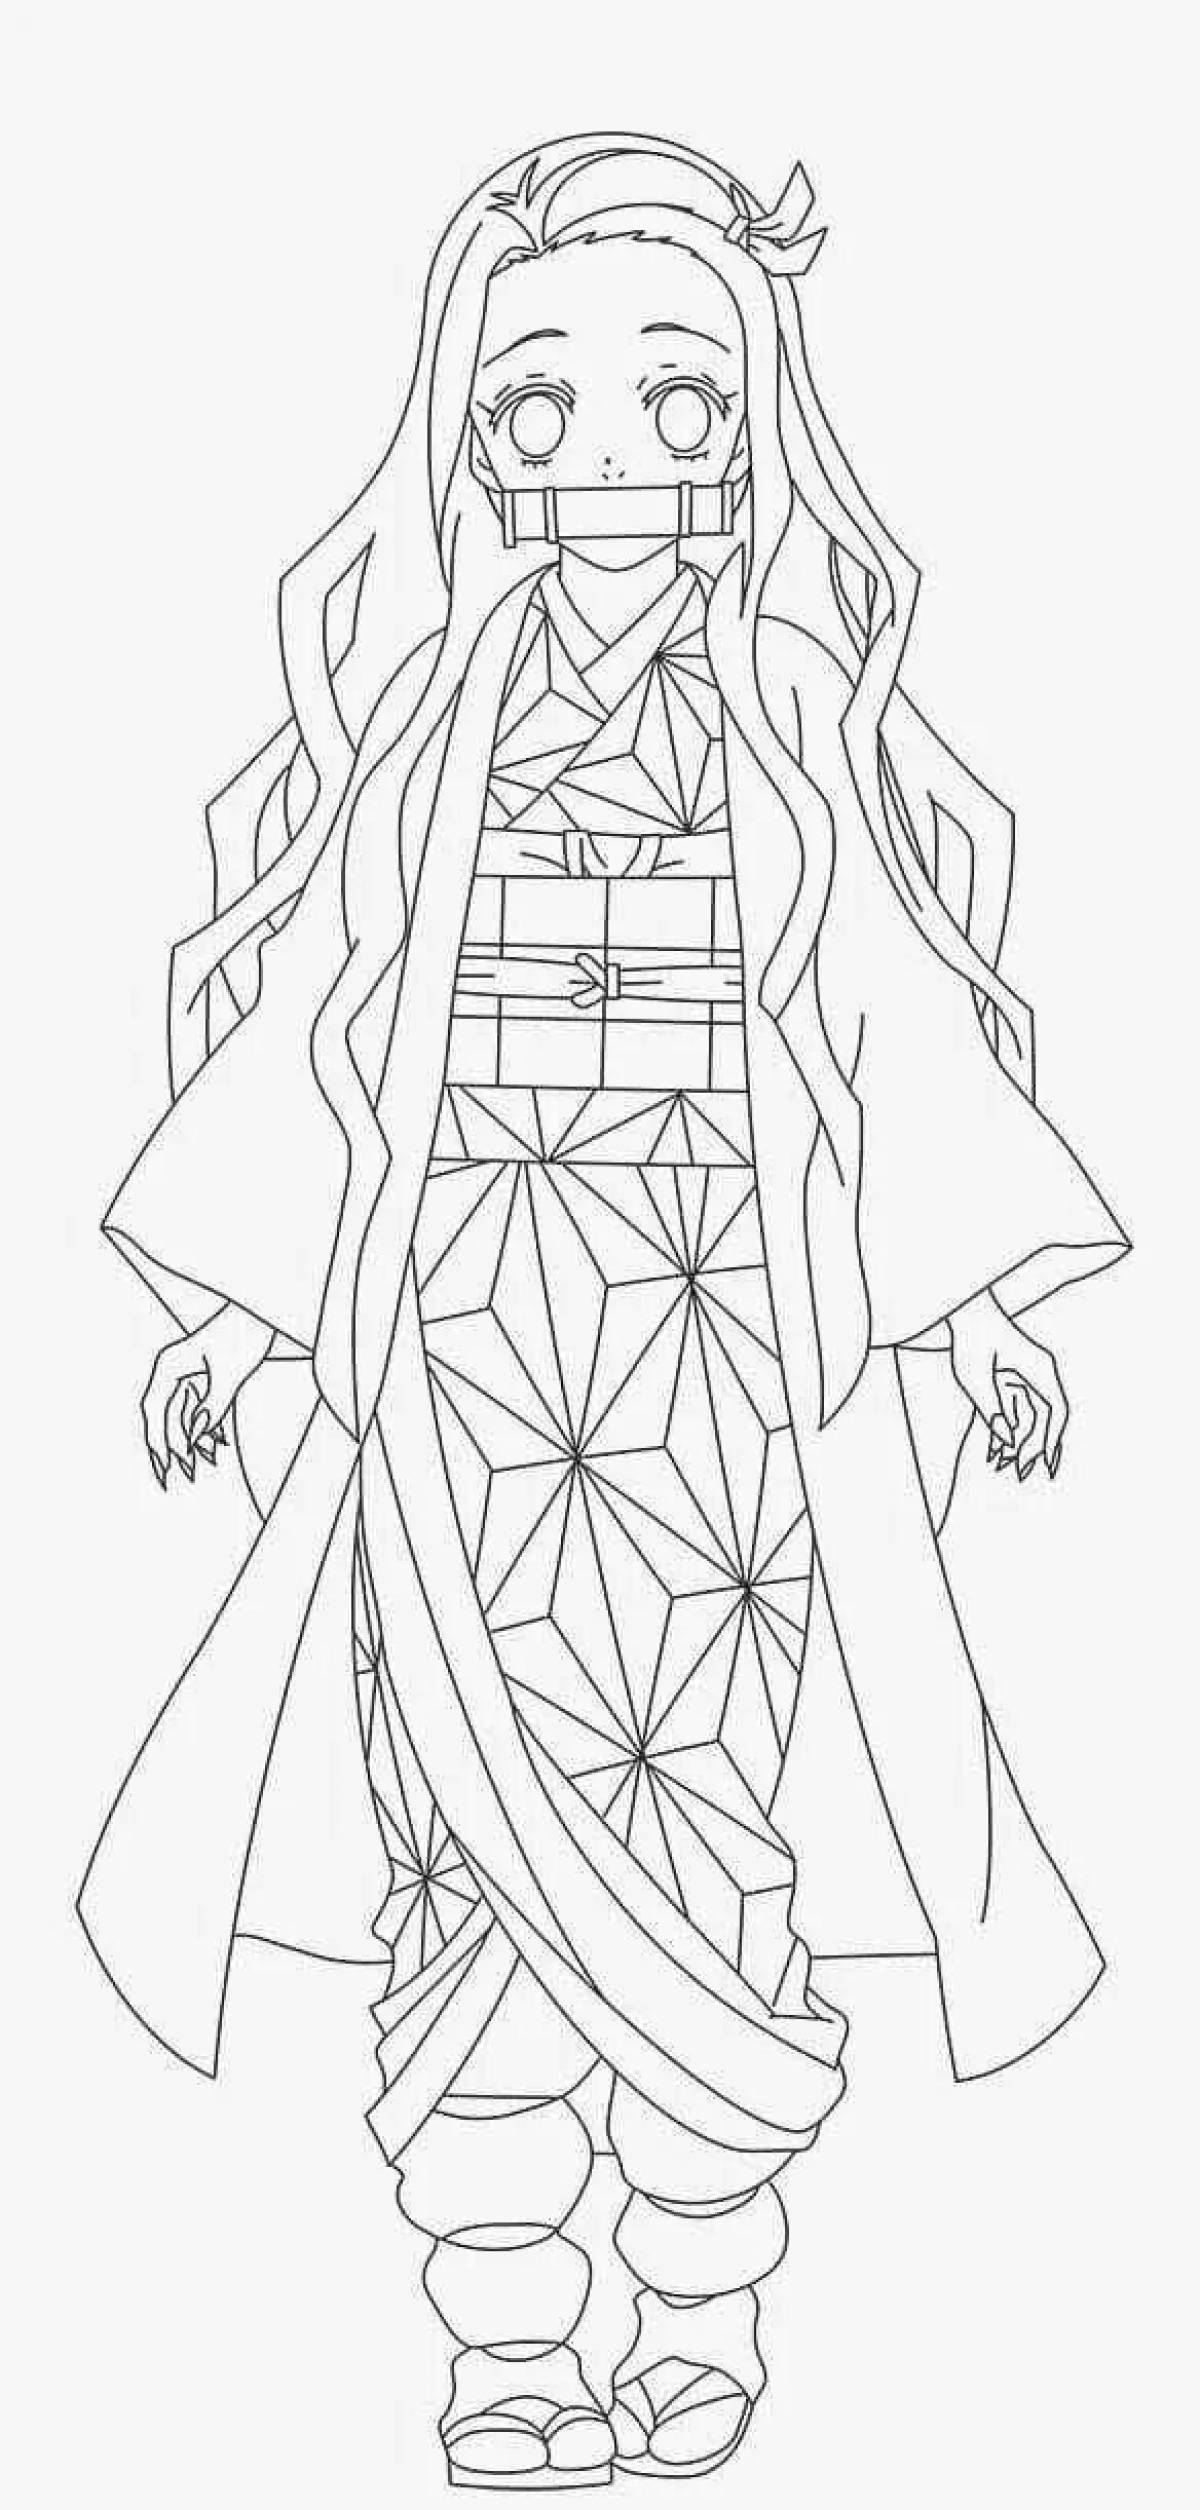 Attracting tanjiro coloring page